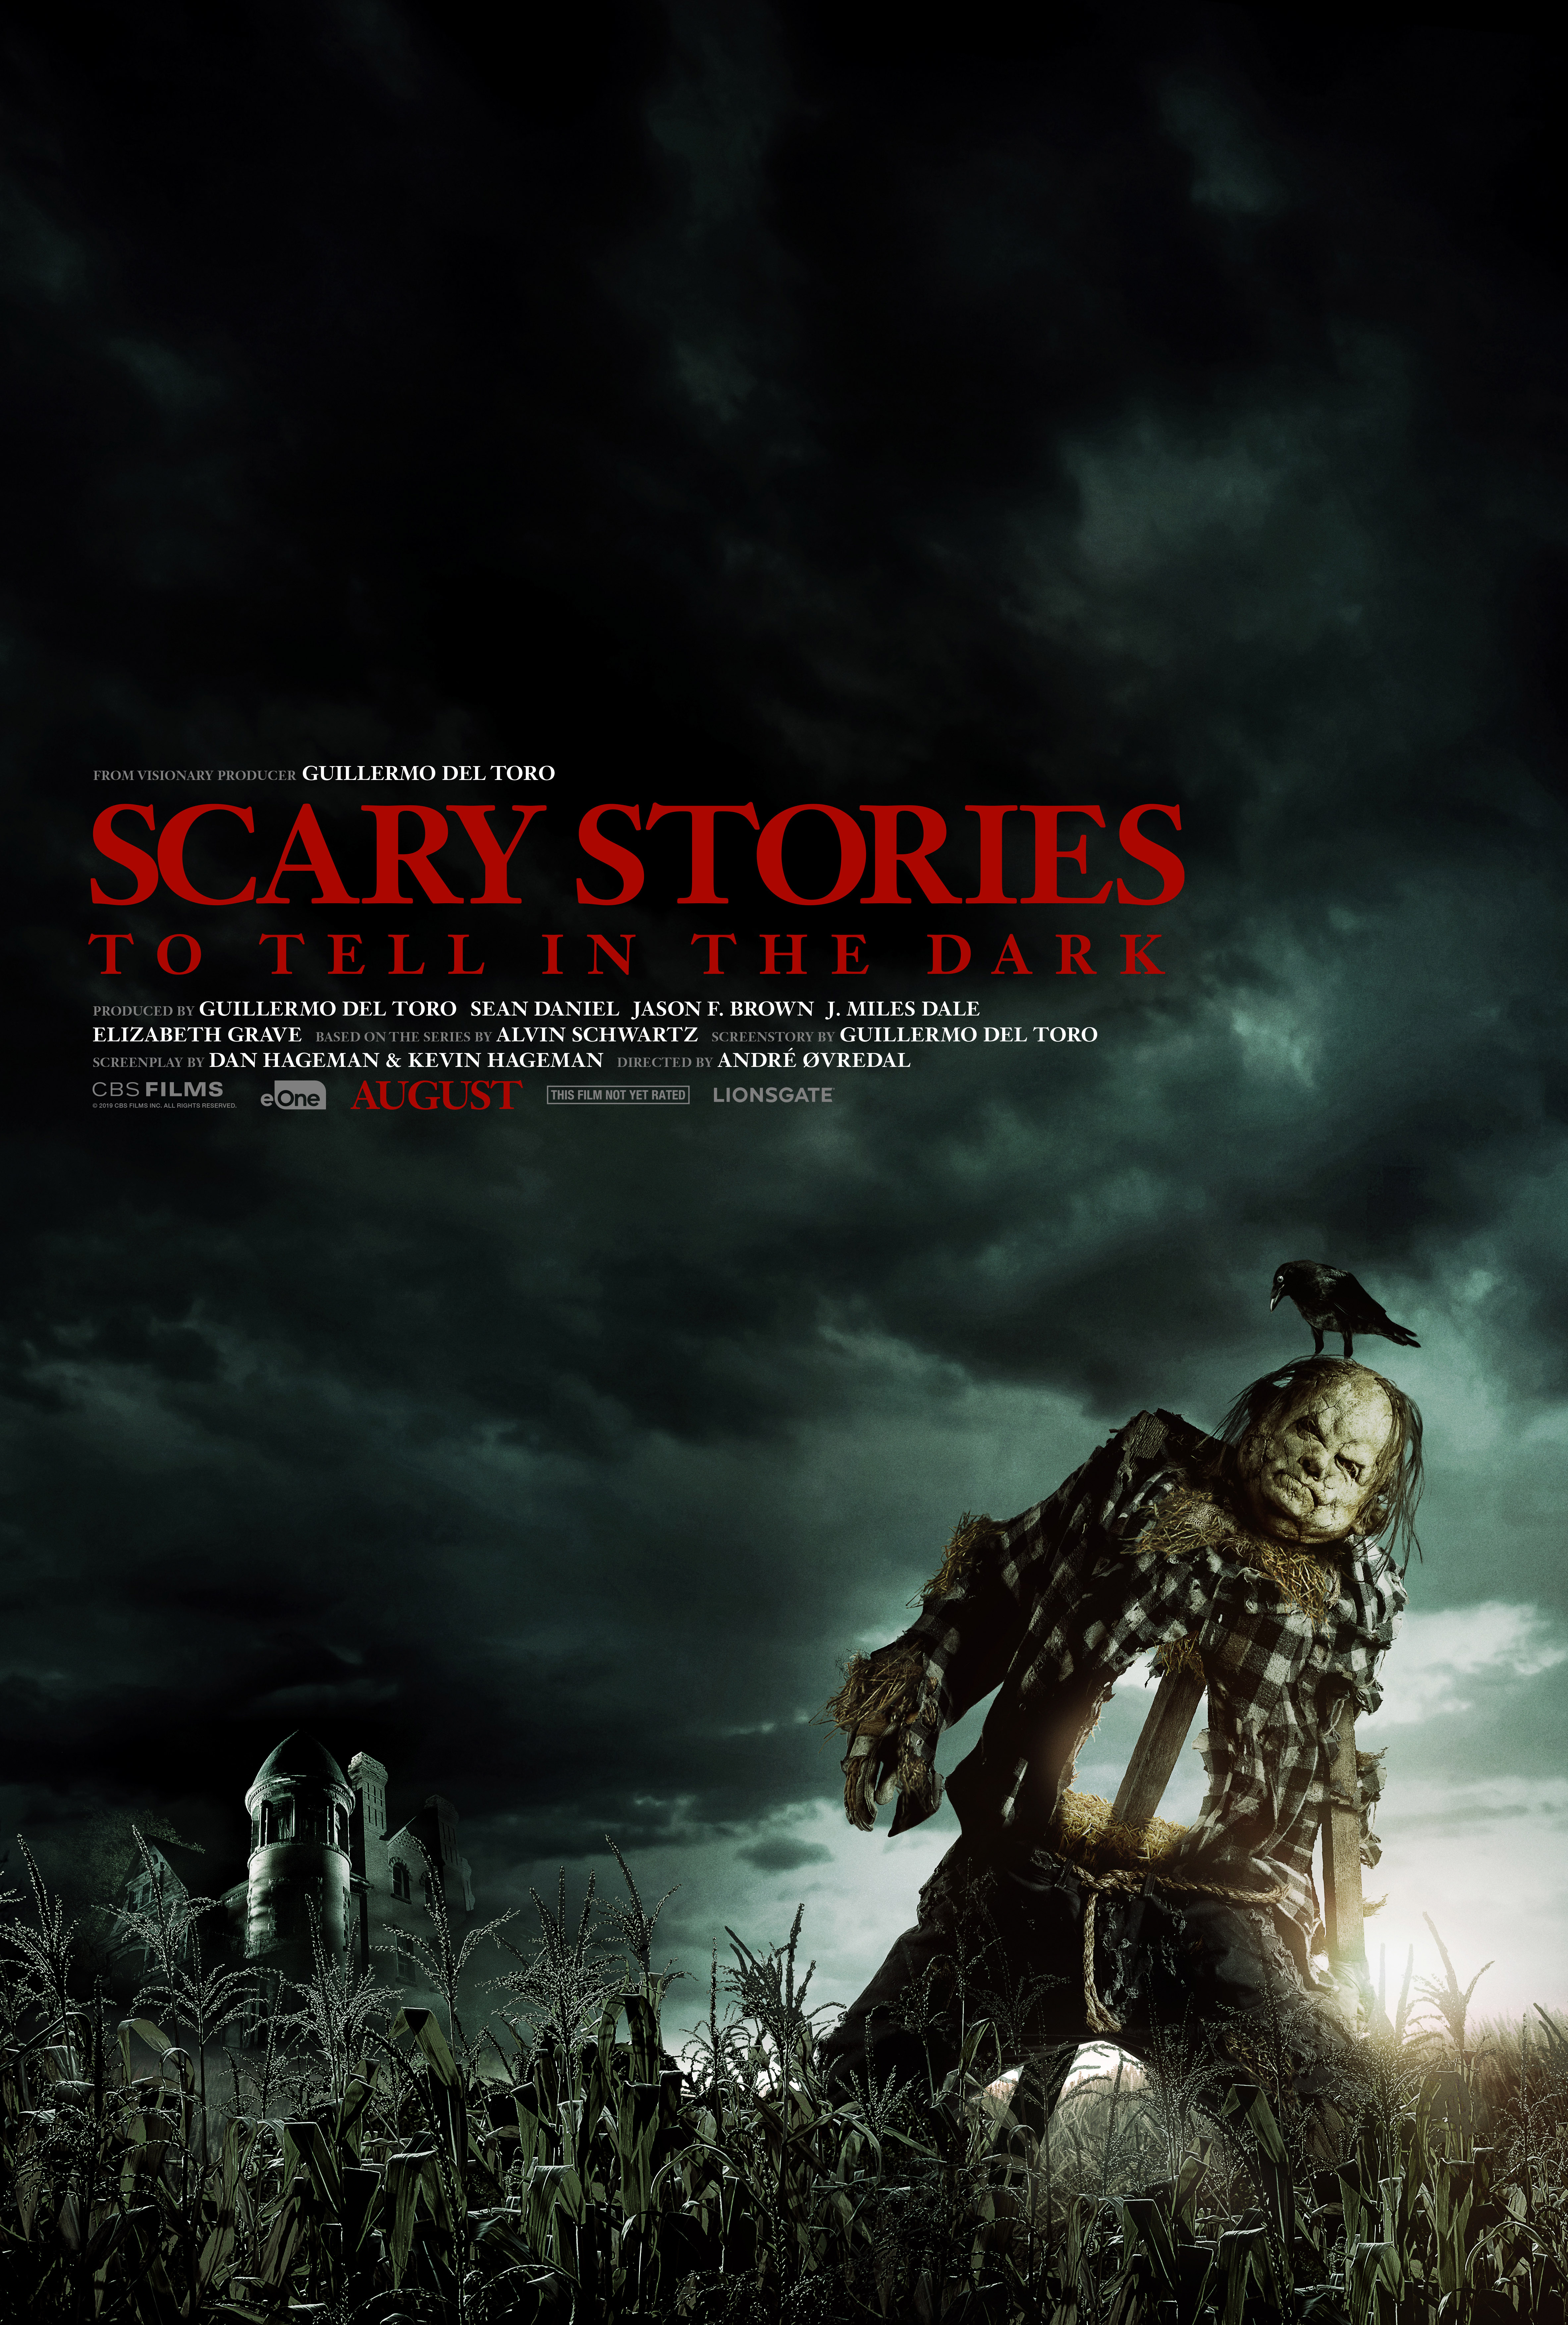 Scary Stories To Tell In The Dark poster (CBS Films)